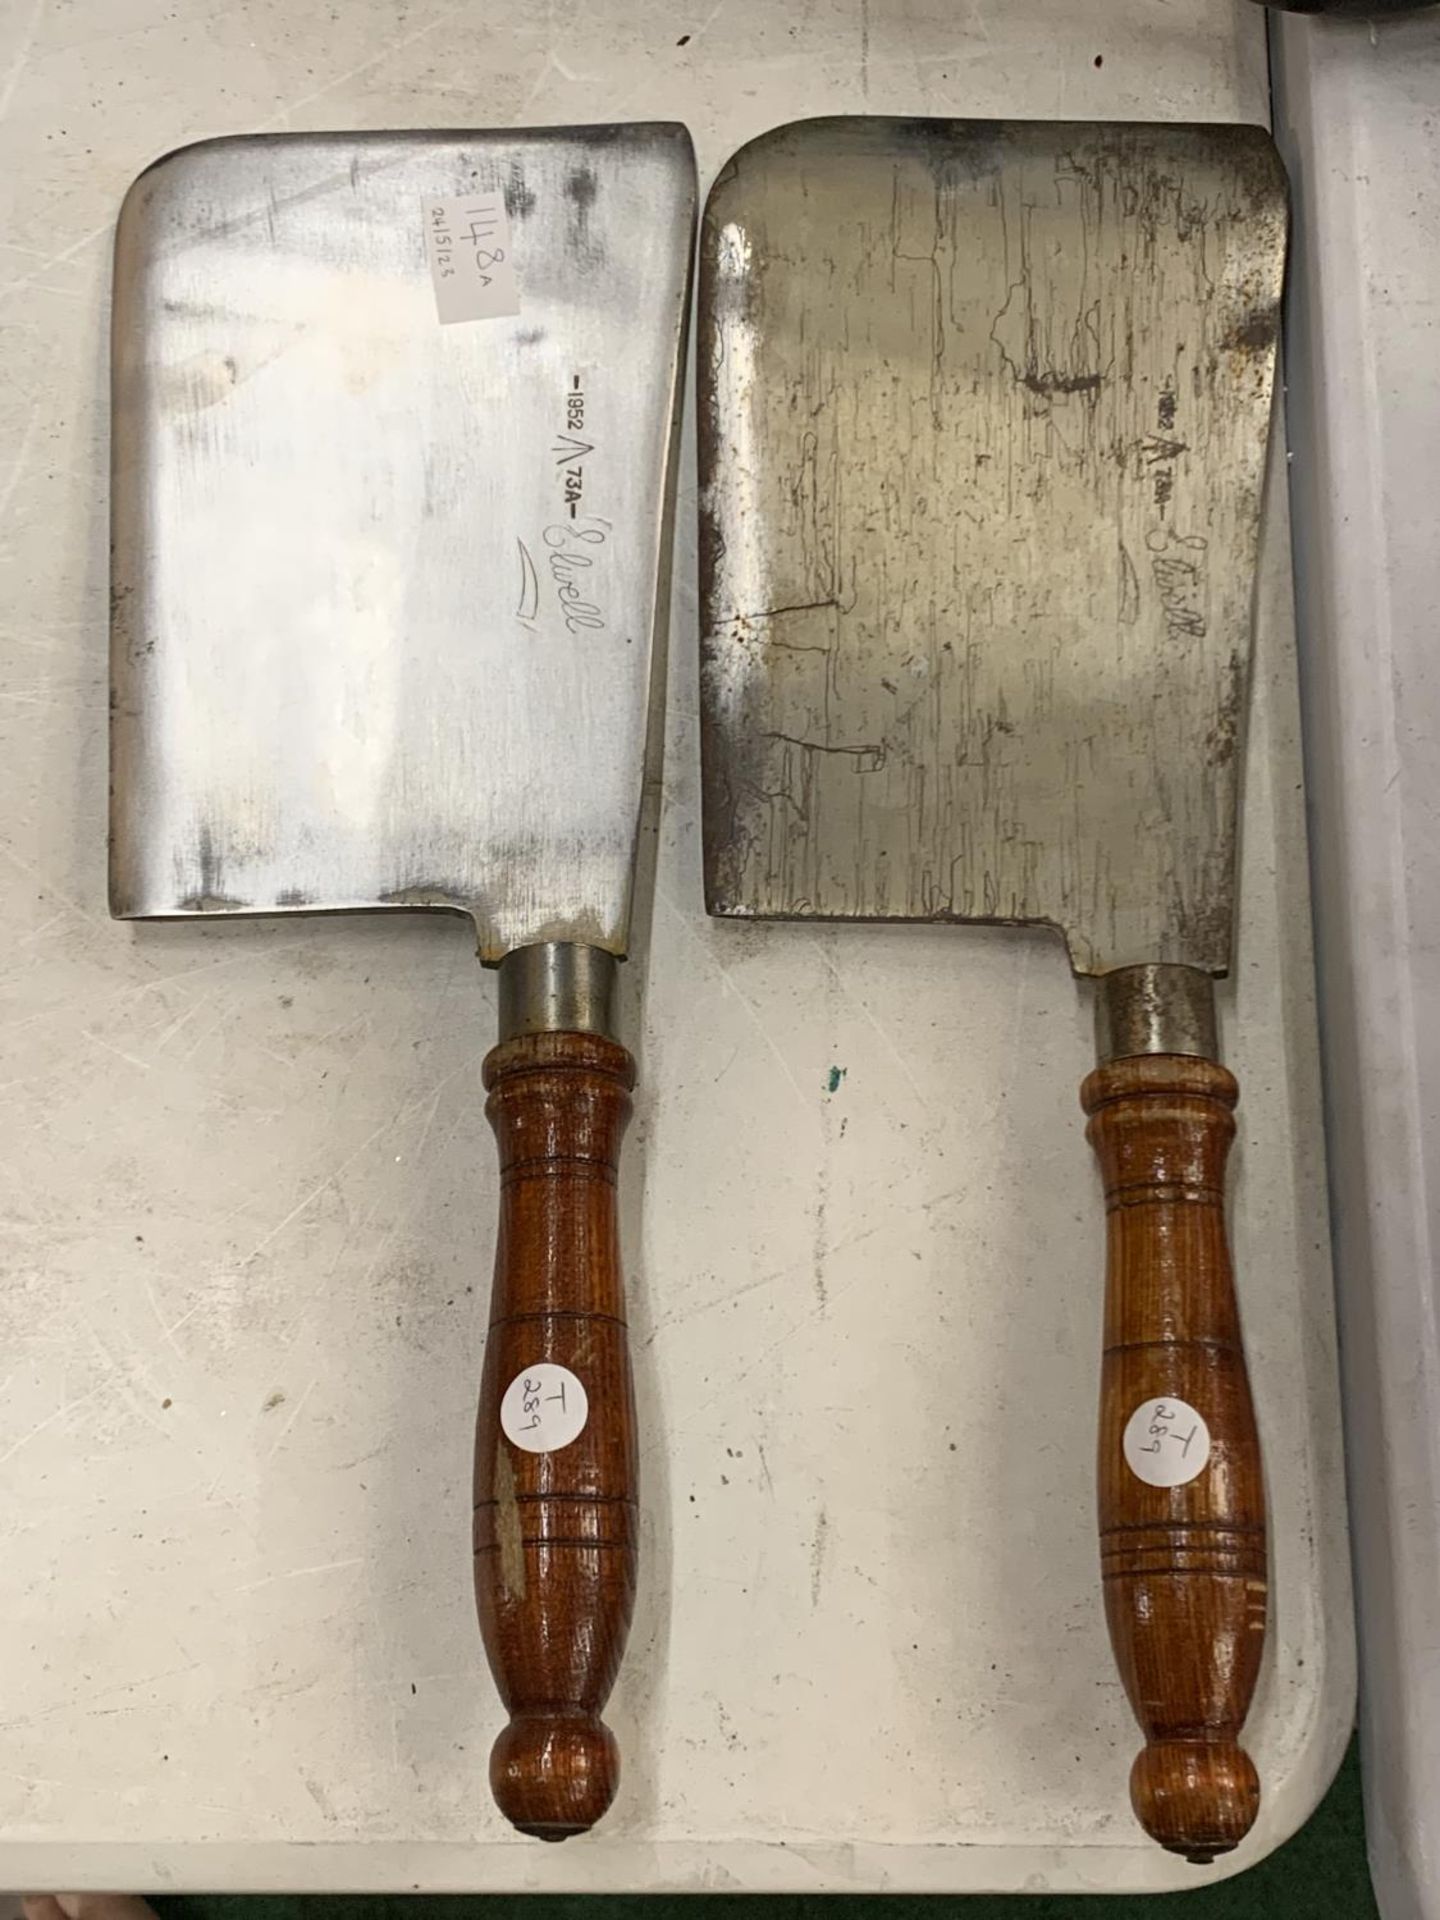 TWO LARGE VINTAGE MILITARY MEAT CLEAVERS